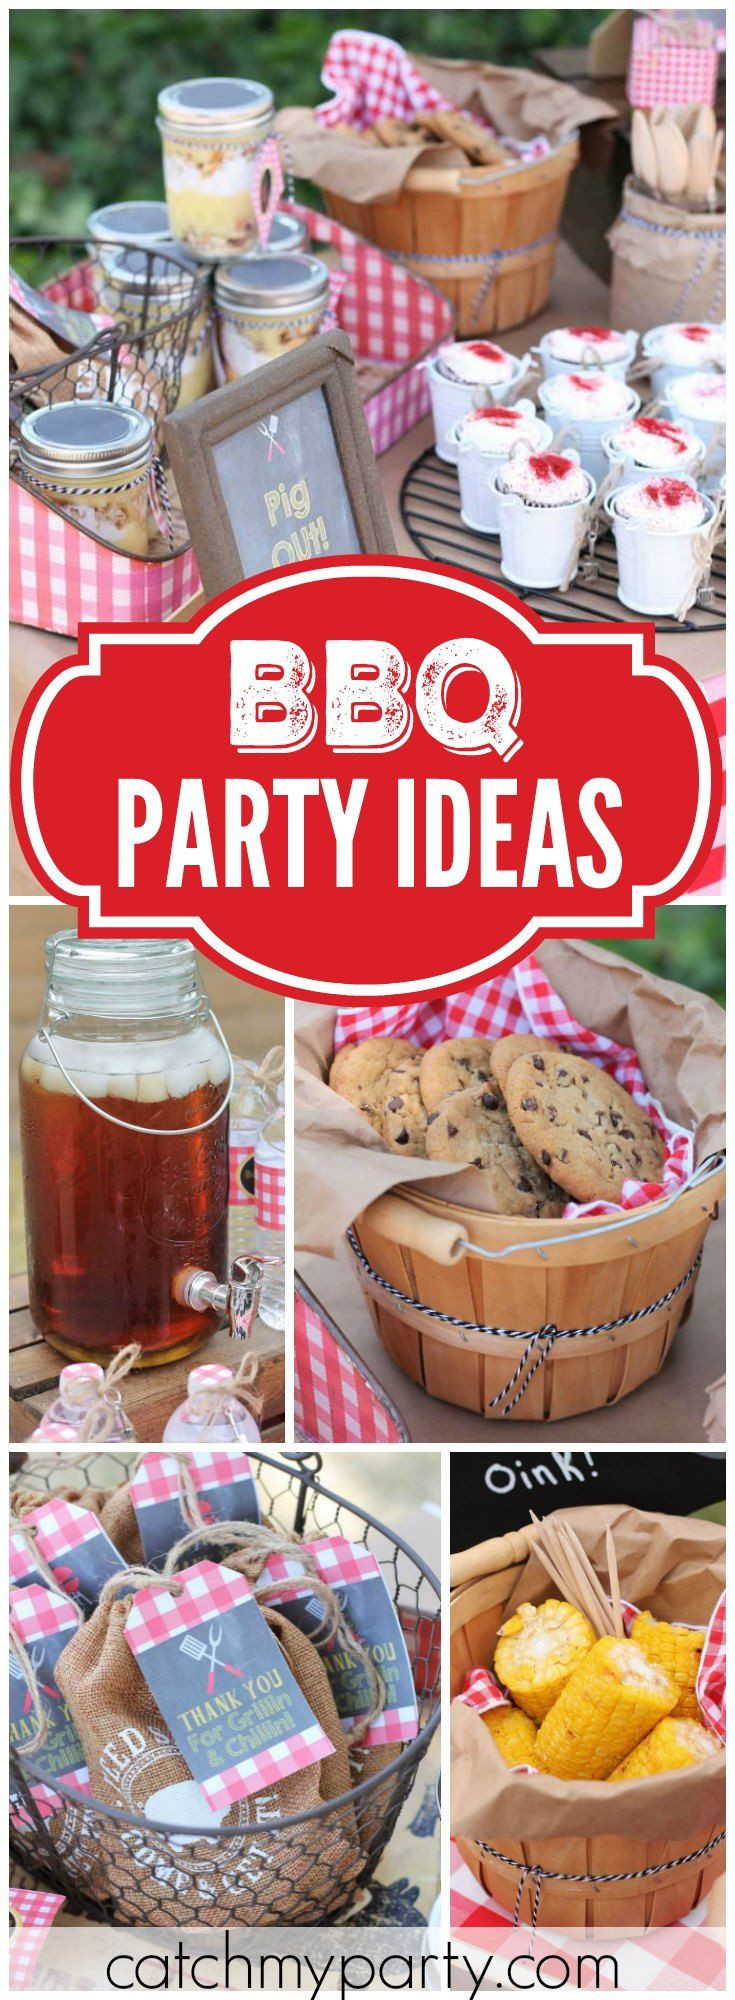 Birthday Party Bbq Food Ideas
 How great is this patriotic backyard summer BBQ party See